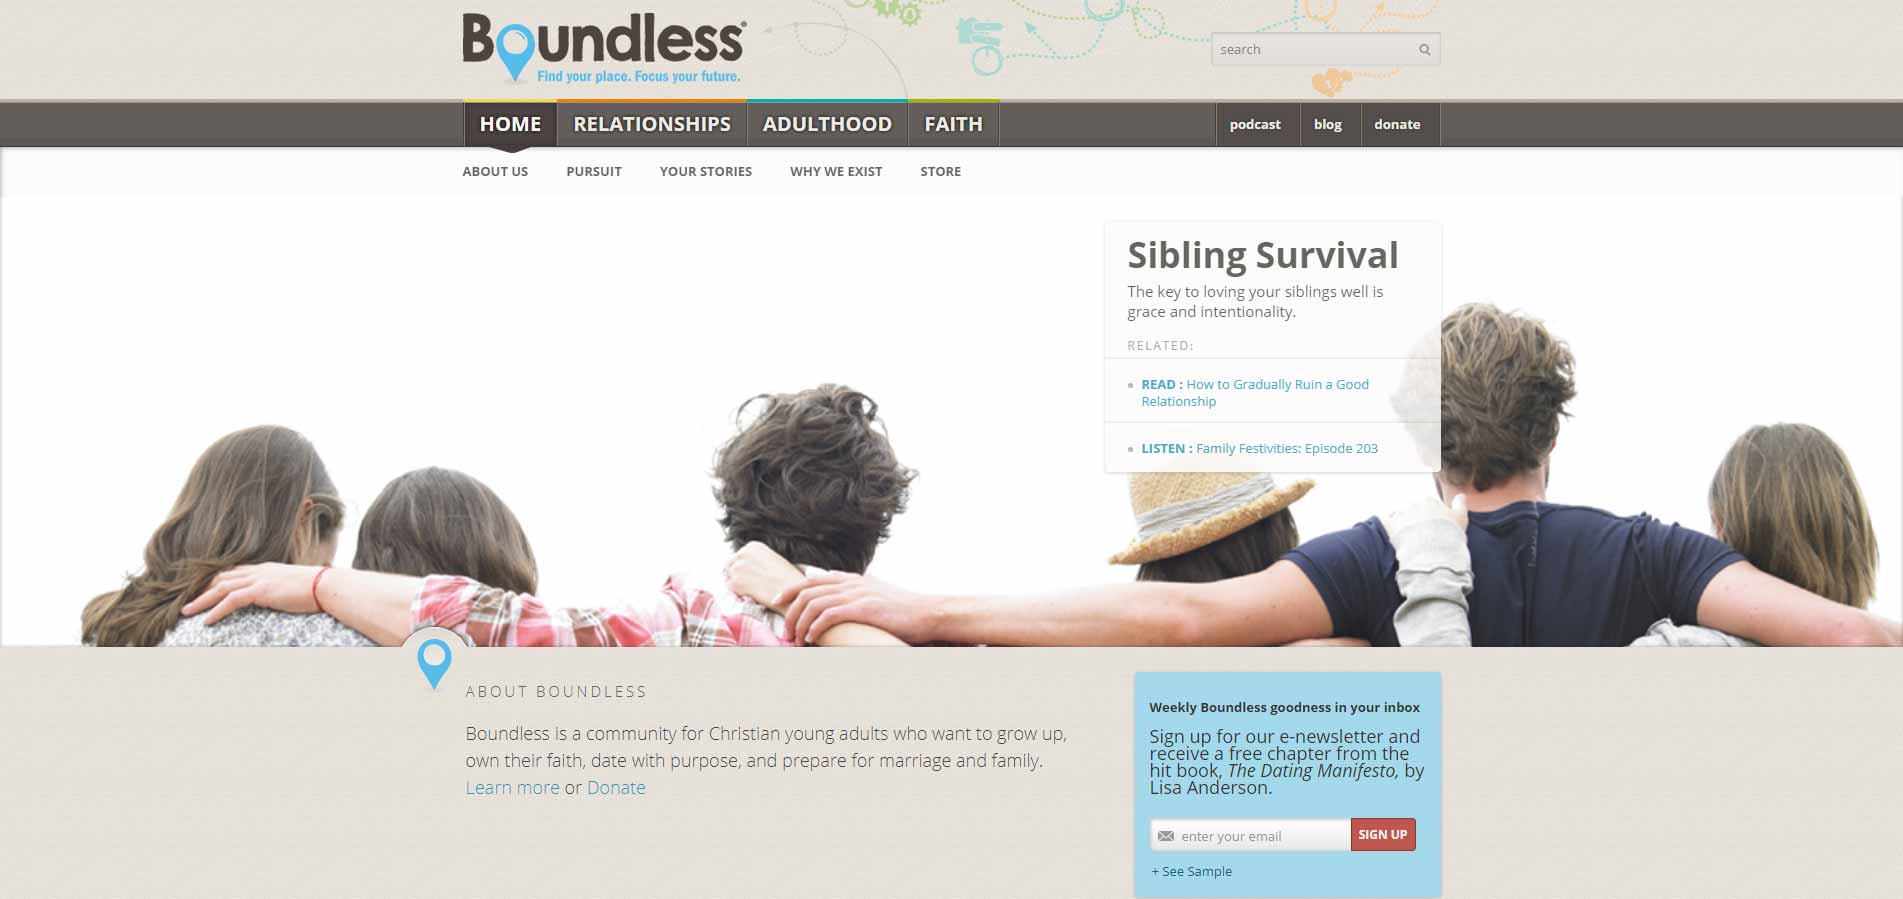 Boundless home page image for international dating site review